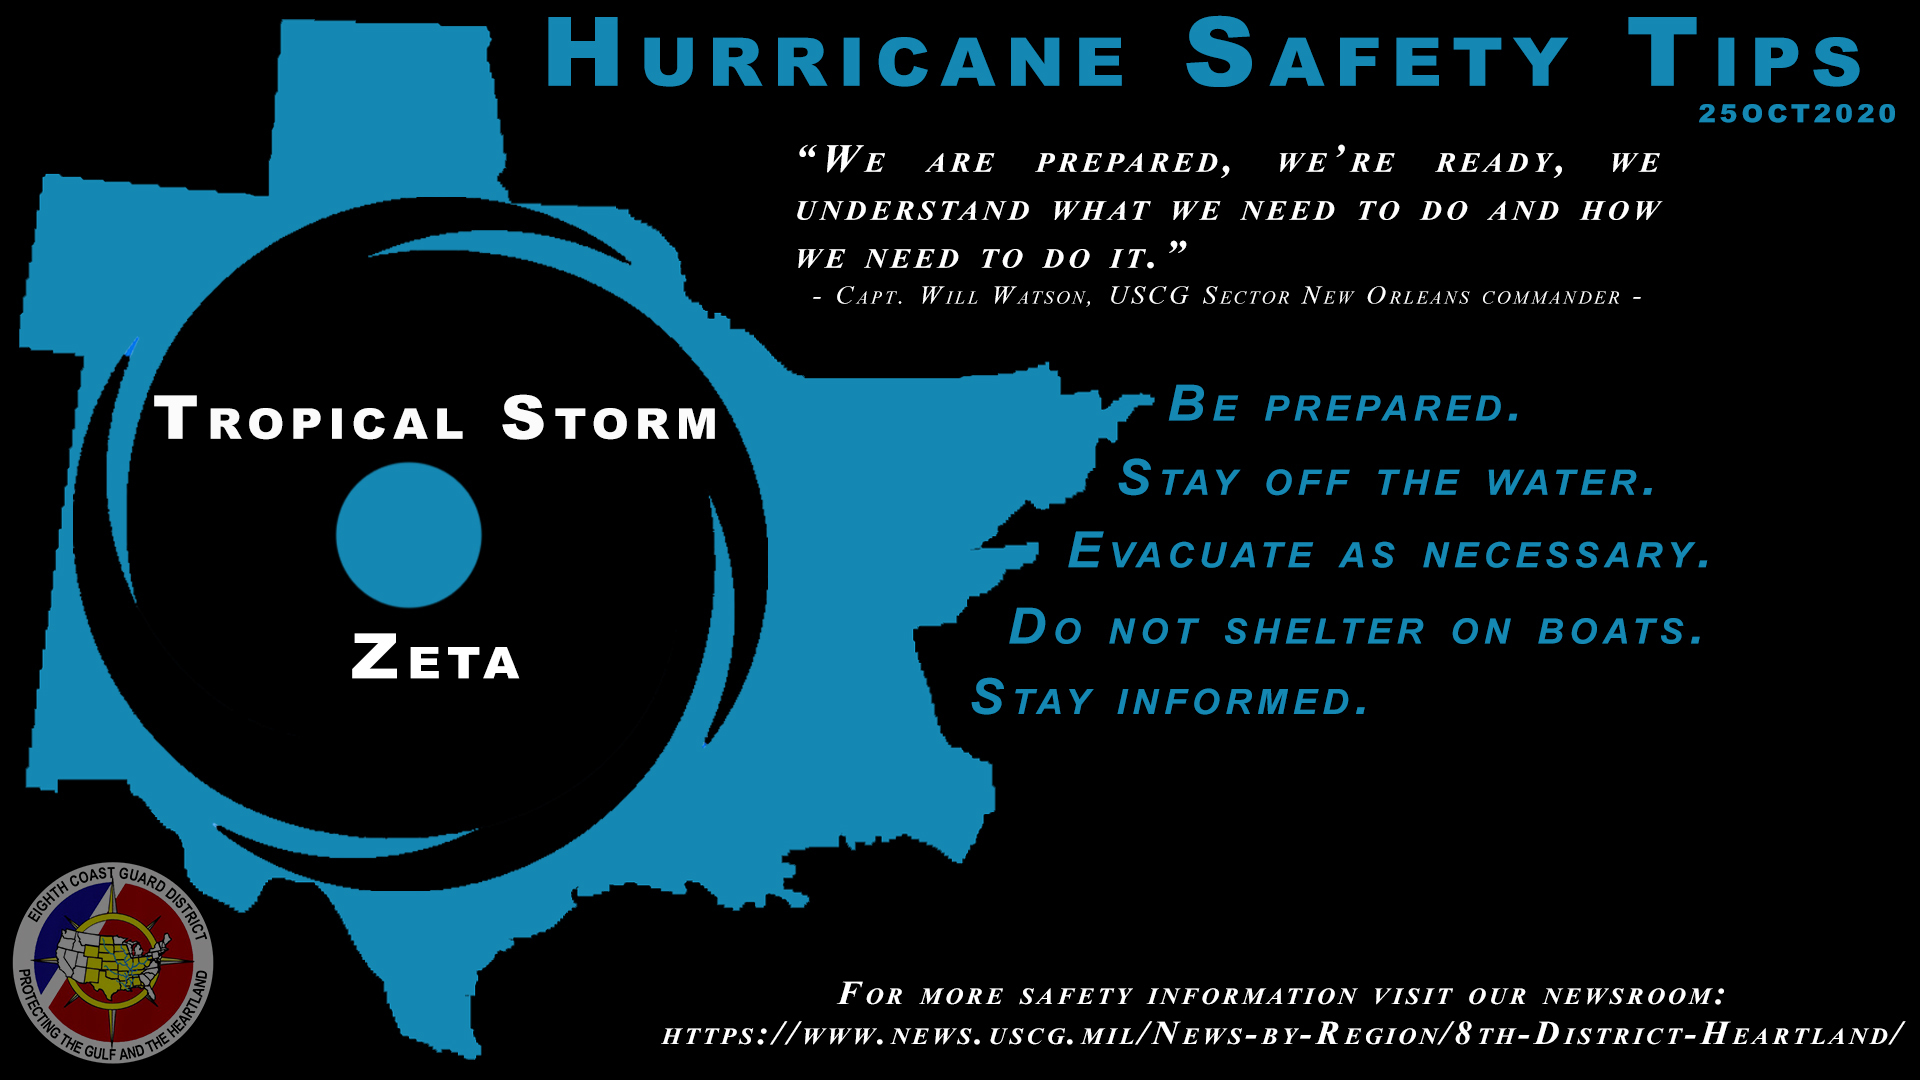 The Coast Guard strongly cautions the maritime community and public to remain vigilant to weather forecasts for Tropical Storm Zeta and to take the necessary precautions as this weather system approaches the area. 